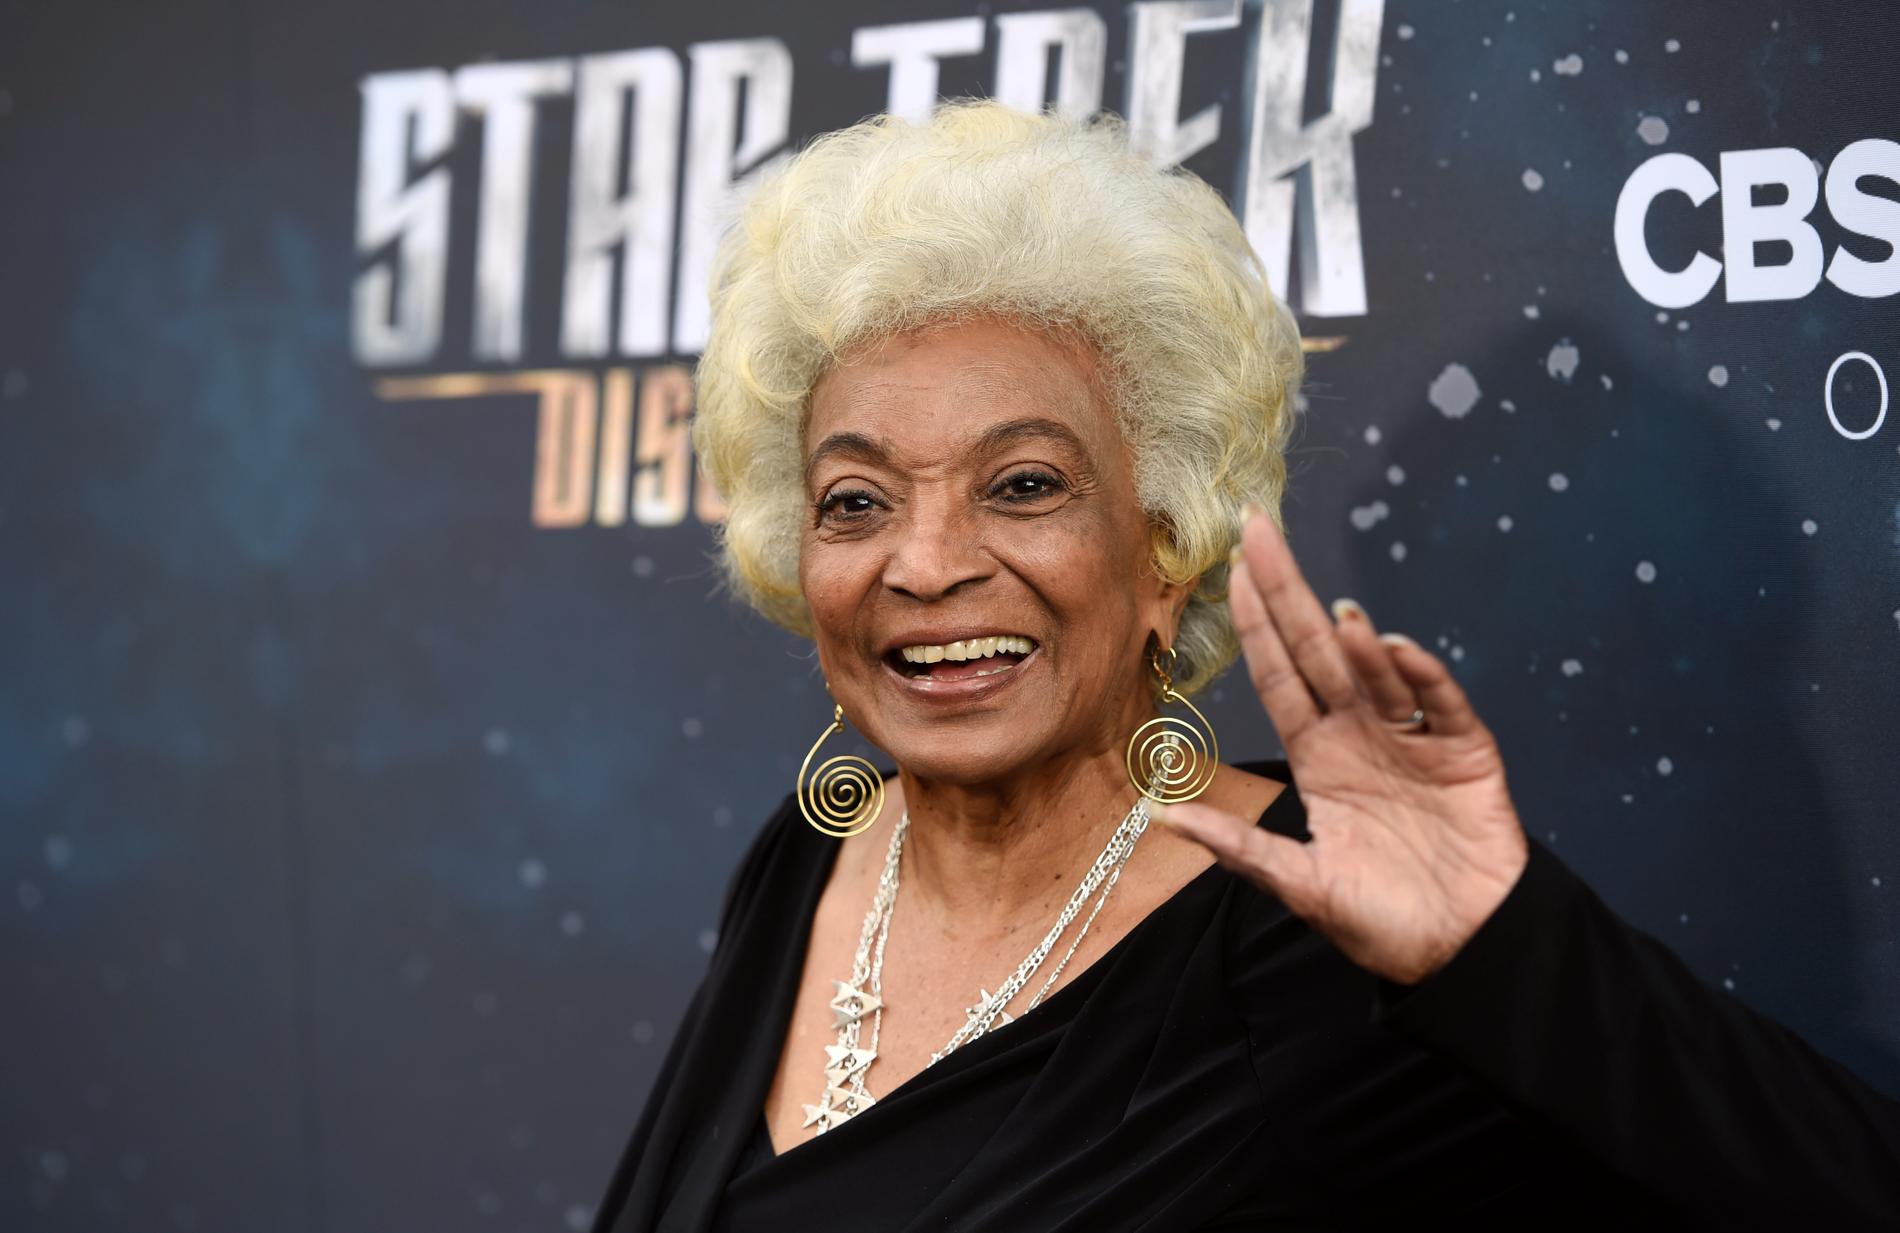 The ashes of 'Star Trek' stars are being sent into space - VG